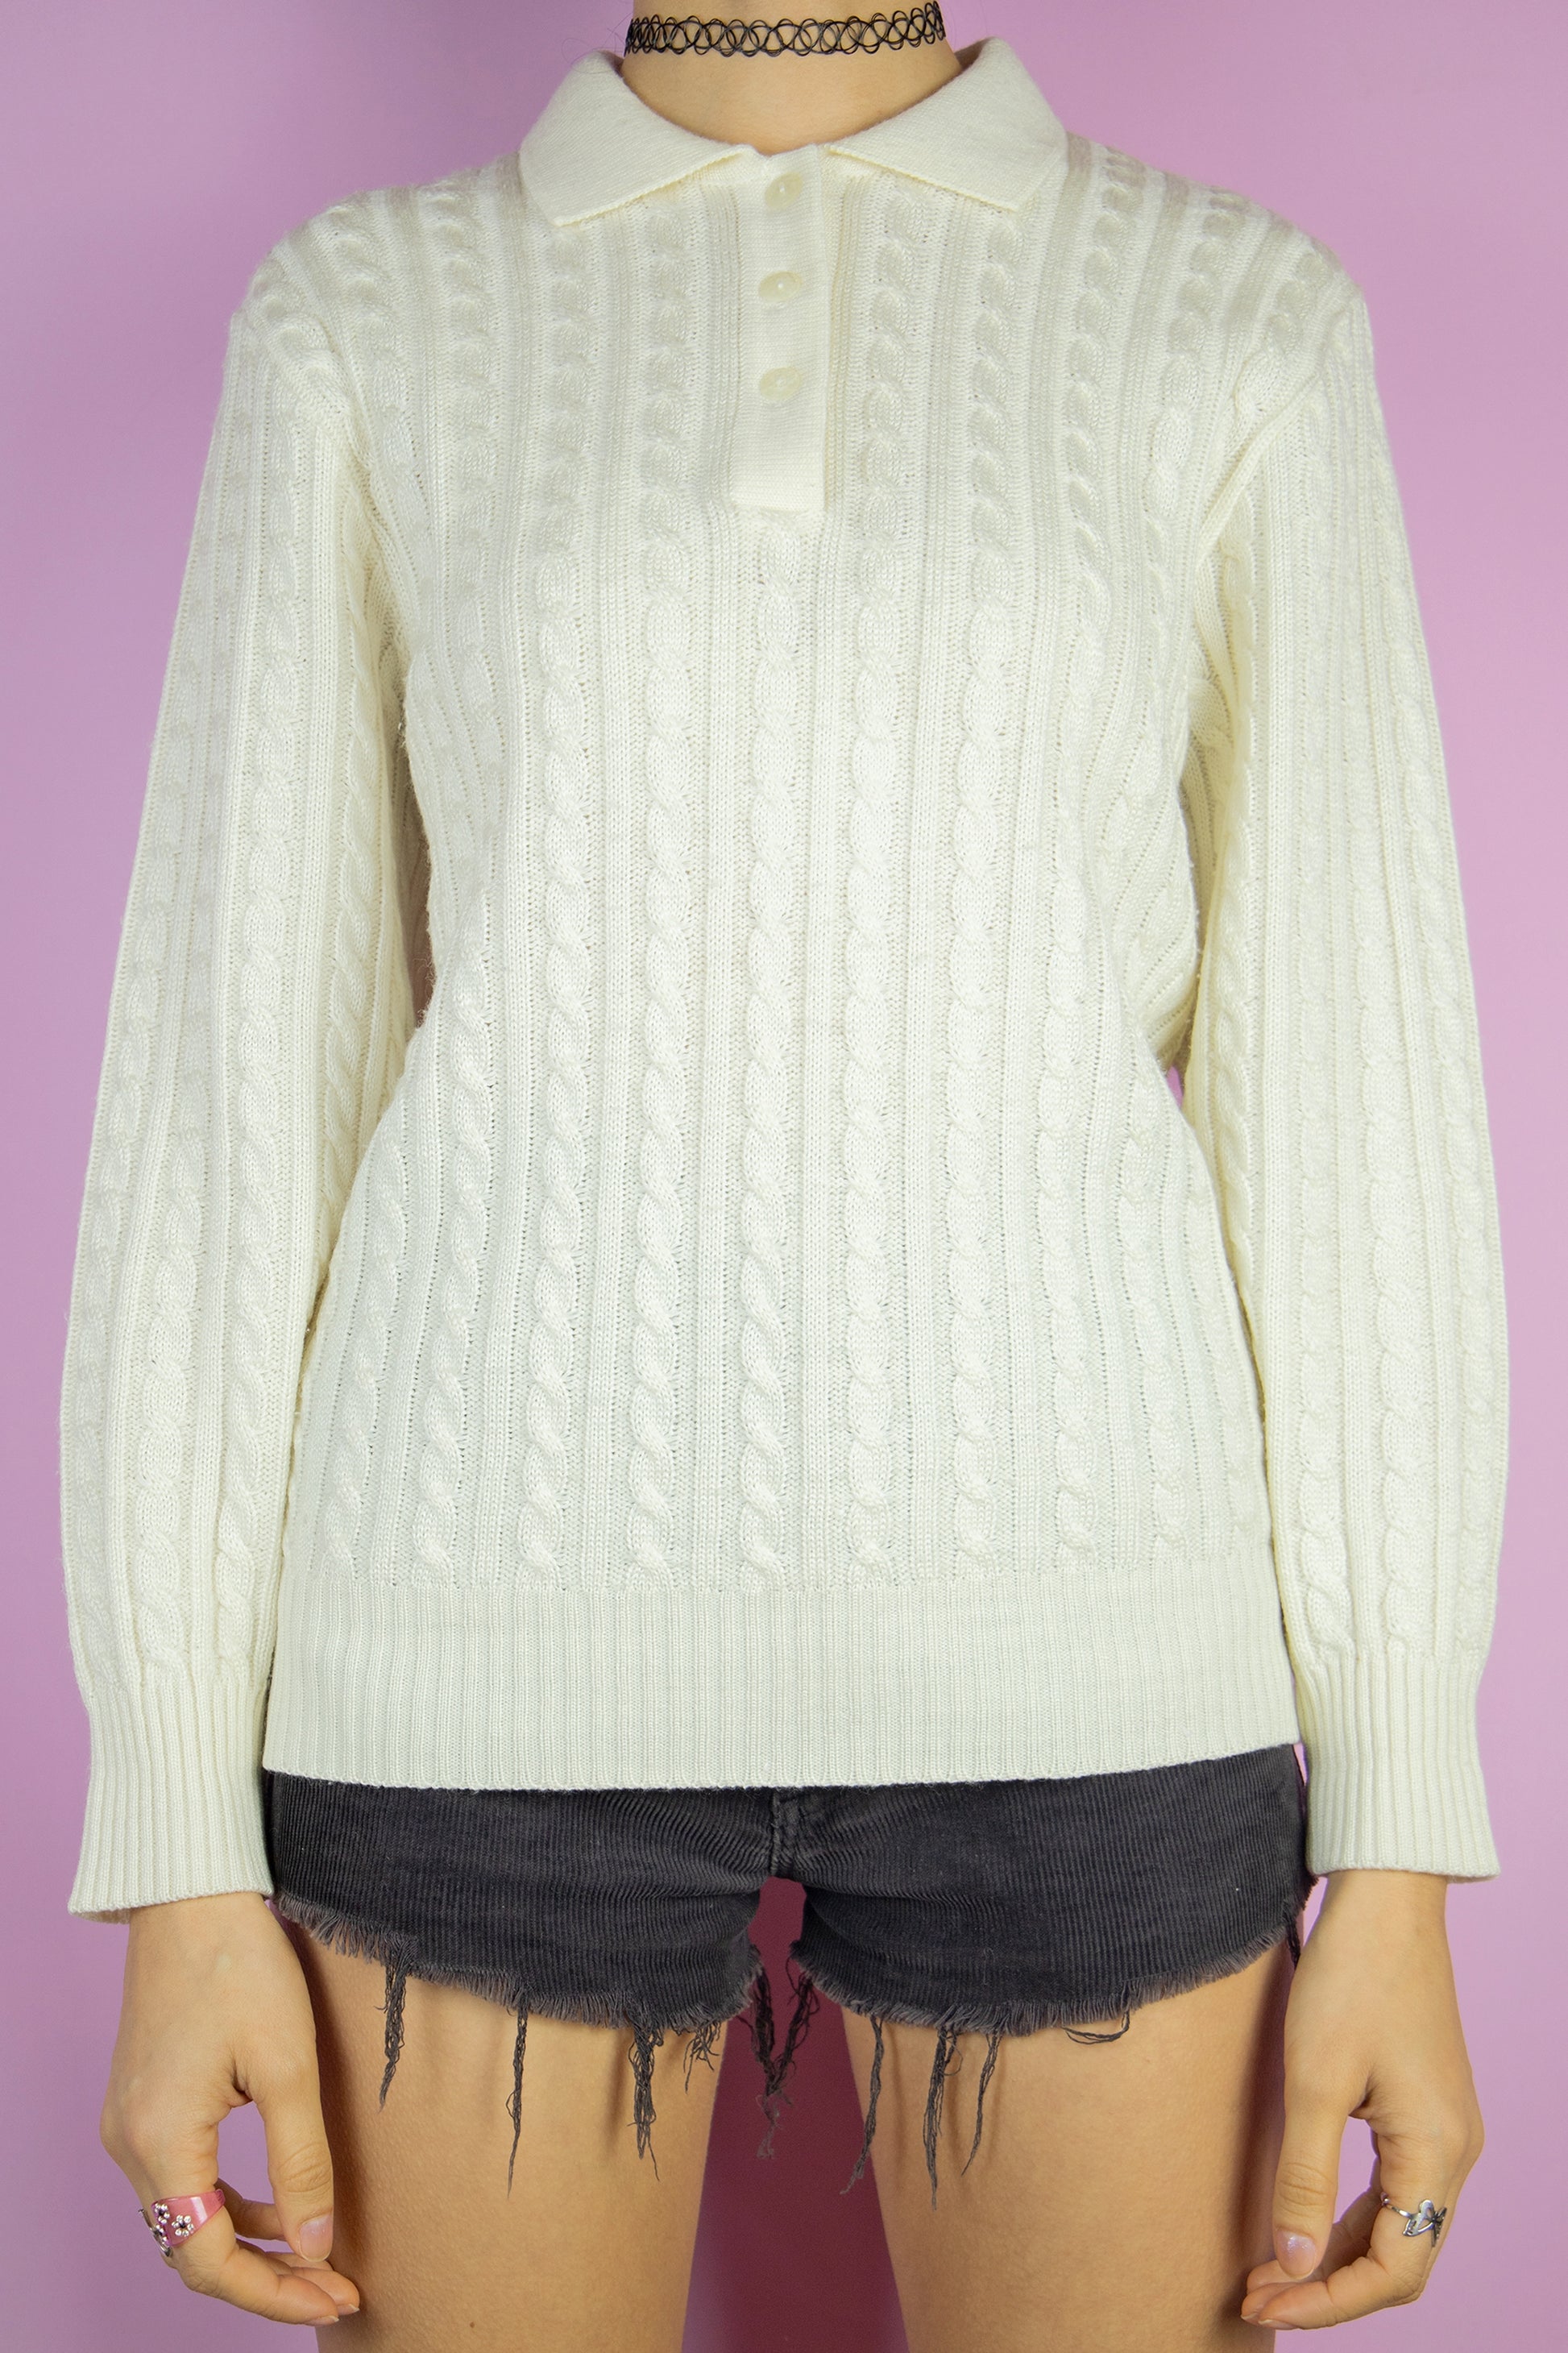 The Vintage 90's White Cable Knit Sweater is a cream white cable knit jumper featuring a collar and three buttons. This classic vintage retro half-button pullover captures the style of the 1990s.